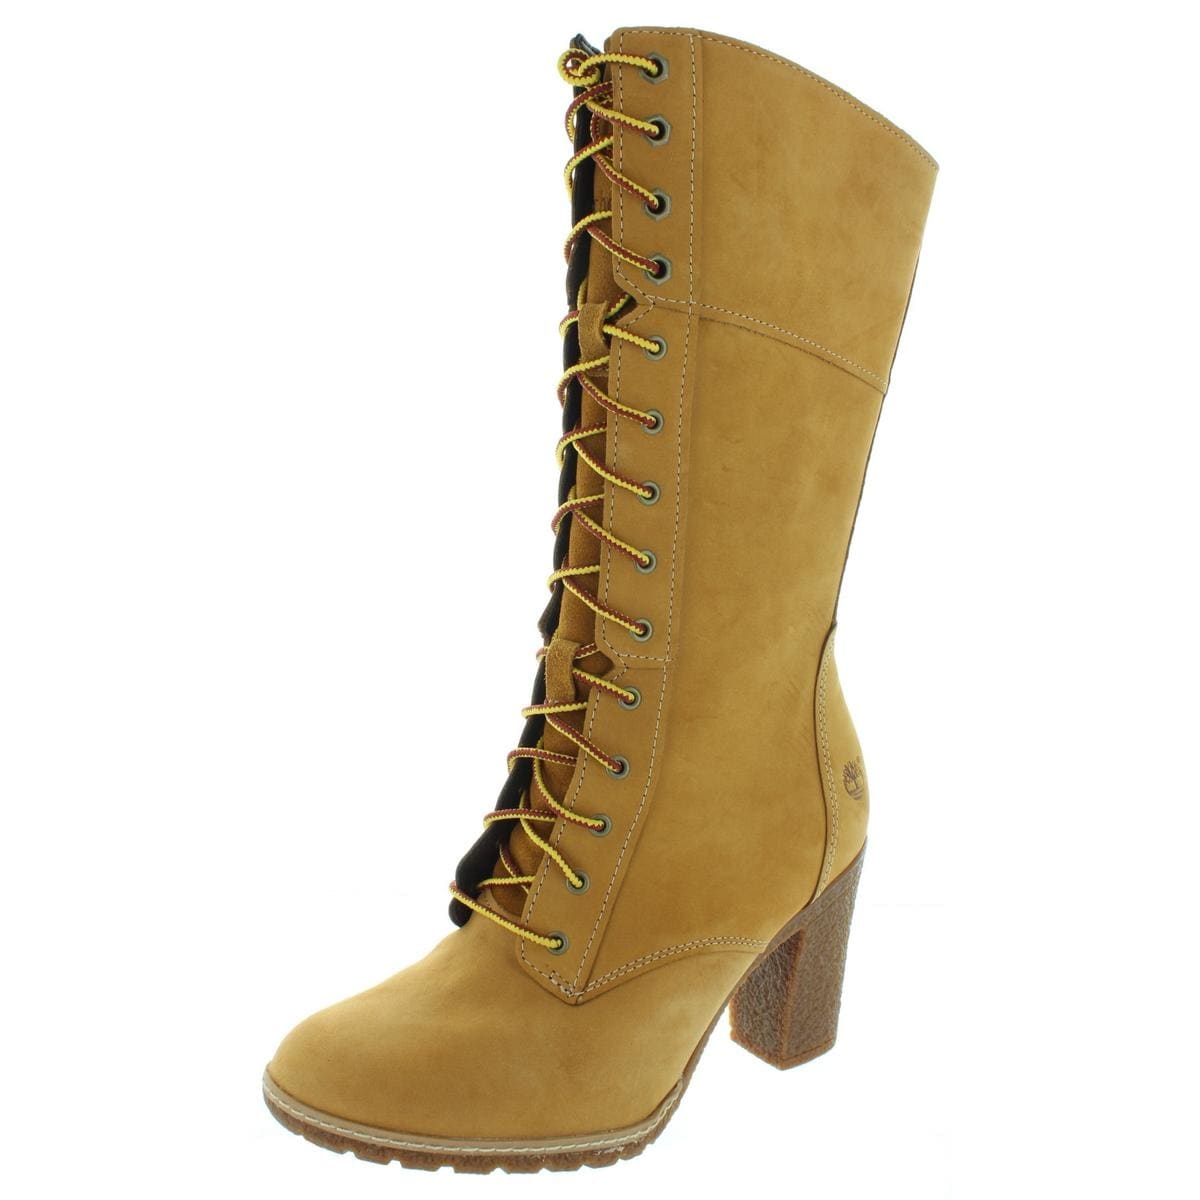 timberland mid calf boots womens